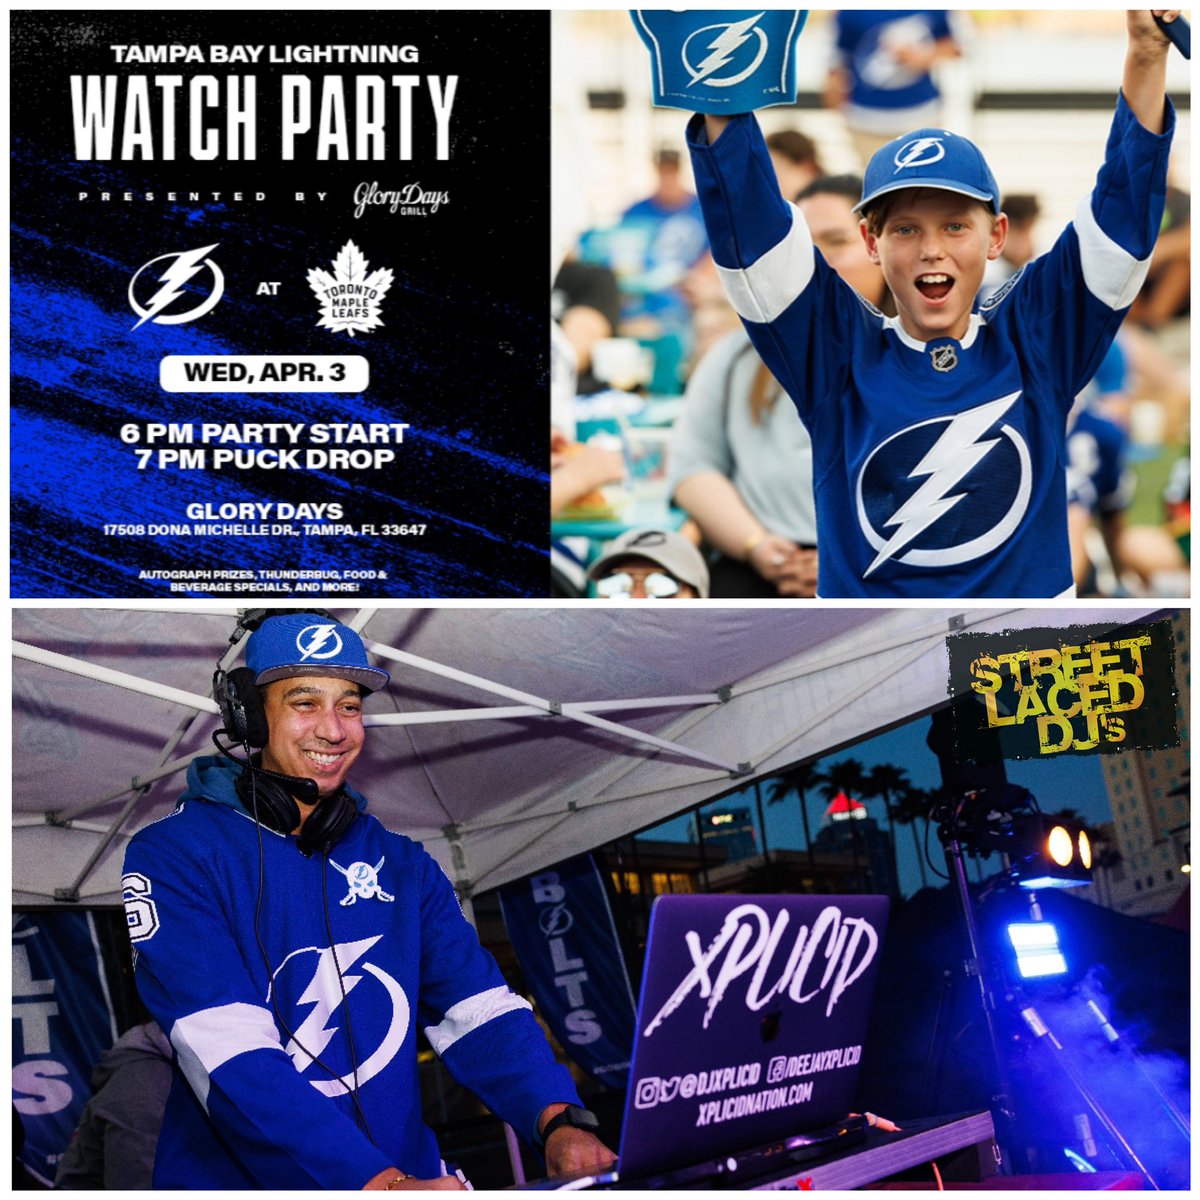 Hope to see YOU tonight, #BoltsNation! We’ll be ready to rock w/@djxplicid TONIGHT for the OFFICIAL @TBLightning Watch Party at @GloryDaysGrill in Tampa at 6p! @ThunderBugTBL, @TBLRollingTHNDR,  #BoltsBlueCrew, autographed giveaways, specials & more! Party starts at 6p! #GoBolts